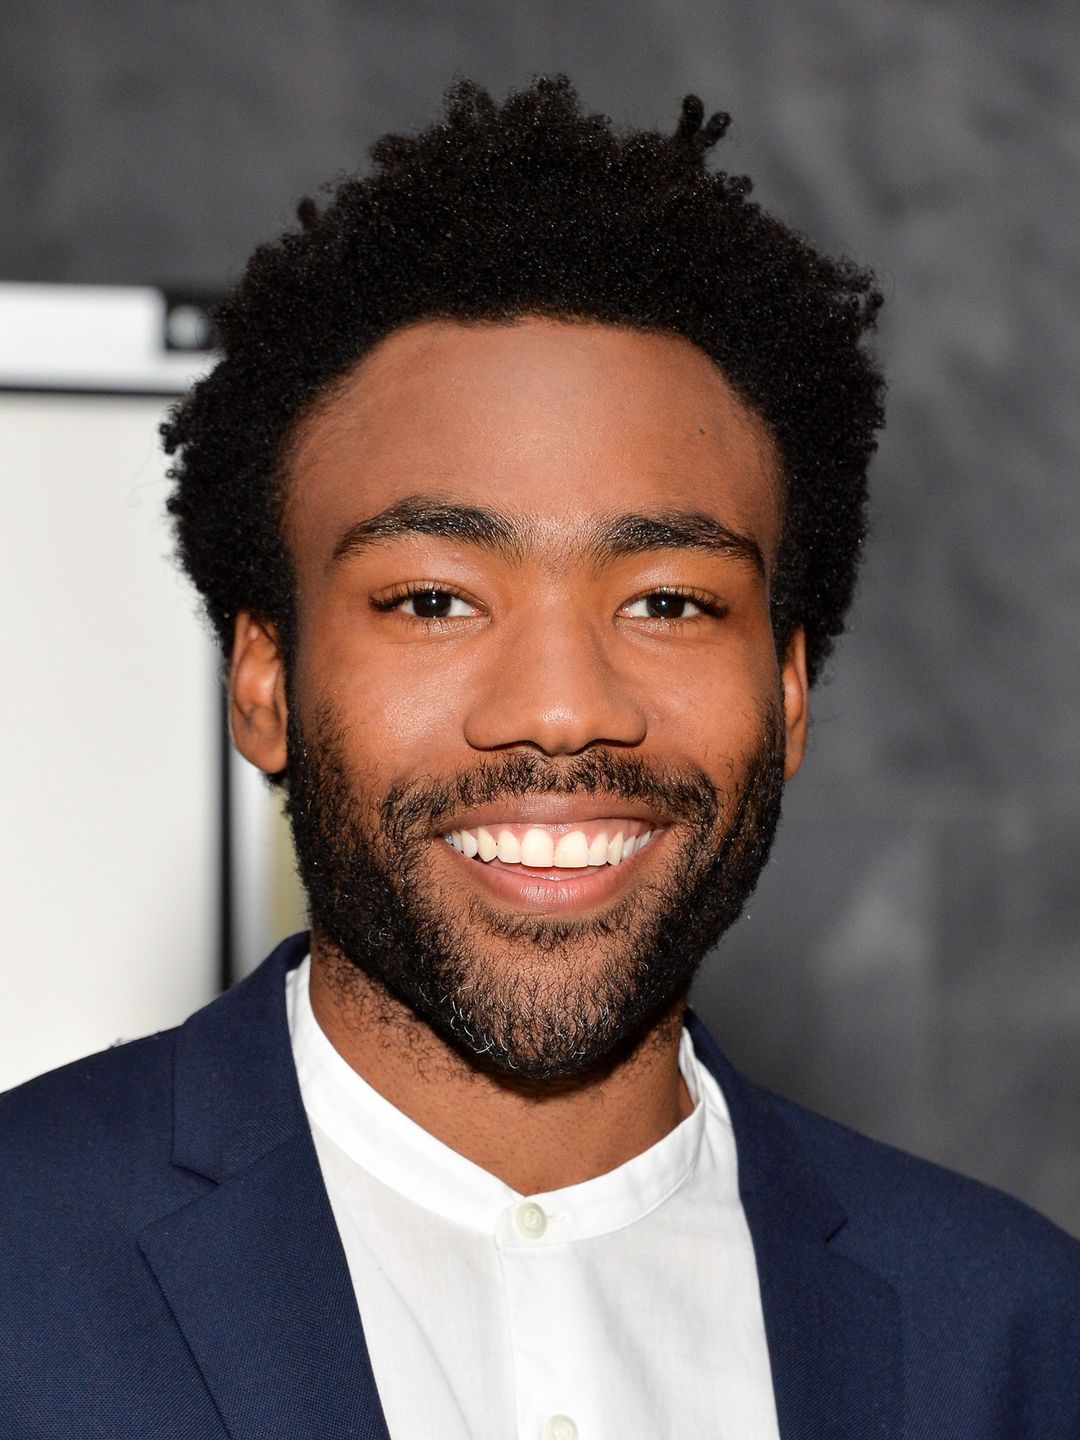 Donald Glover in real life